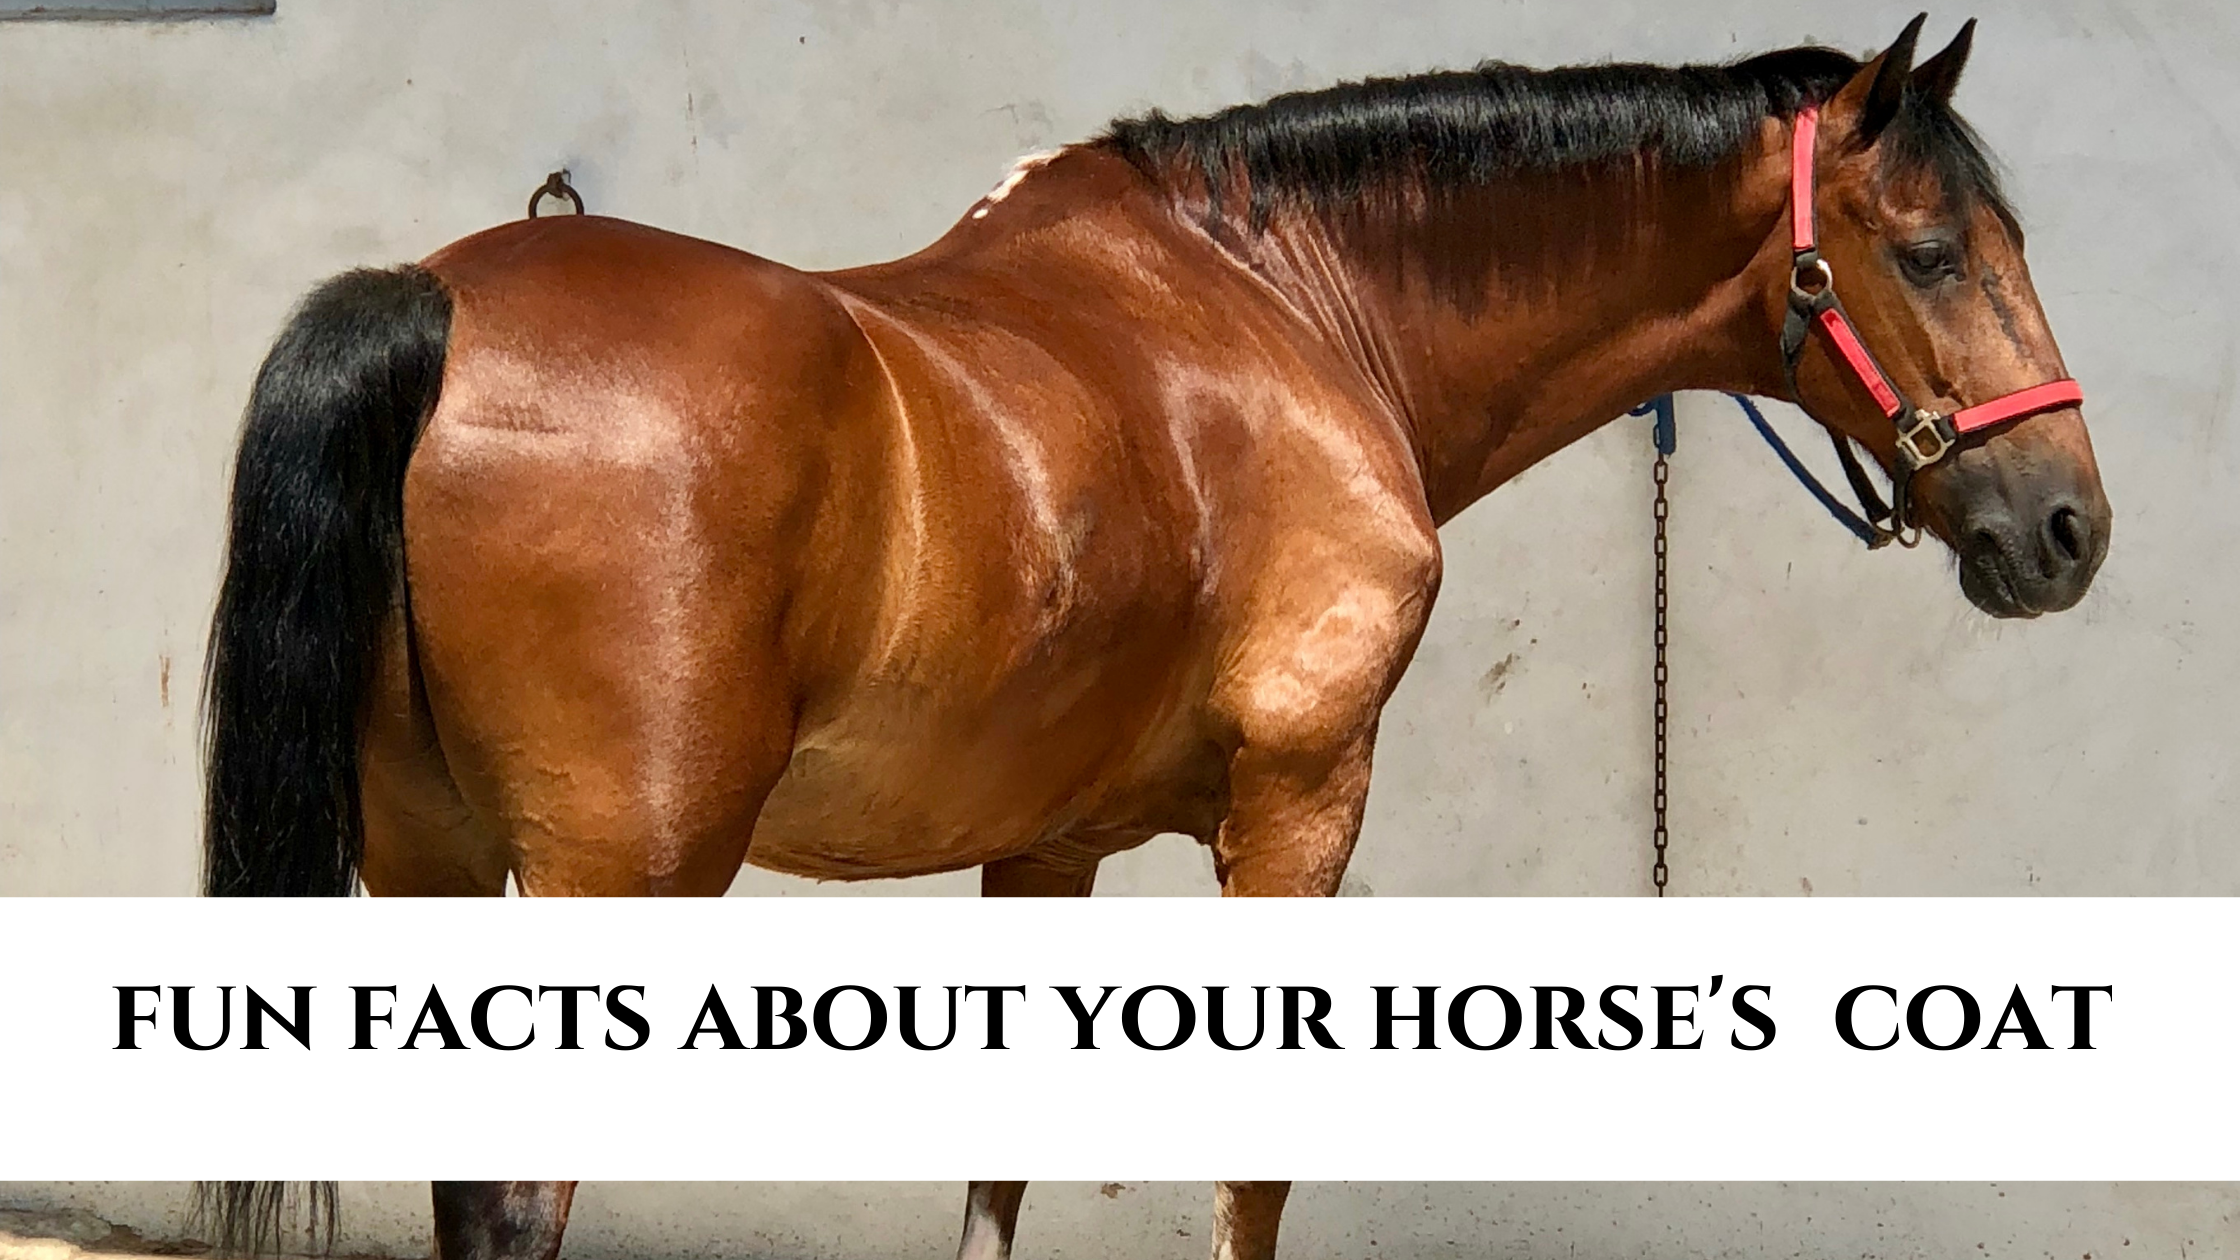 Fun facts about your horse's coat! - HandsOn